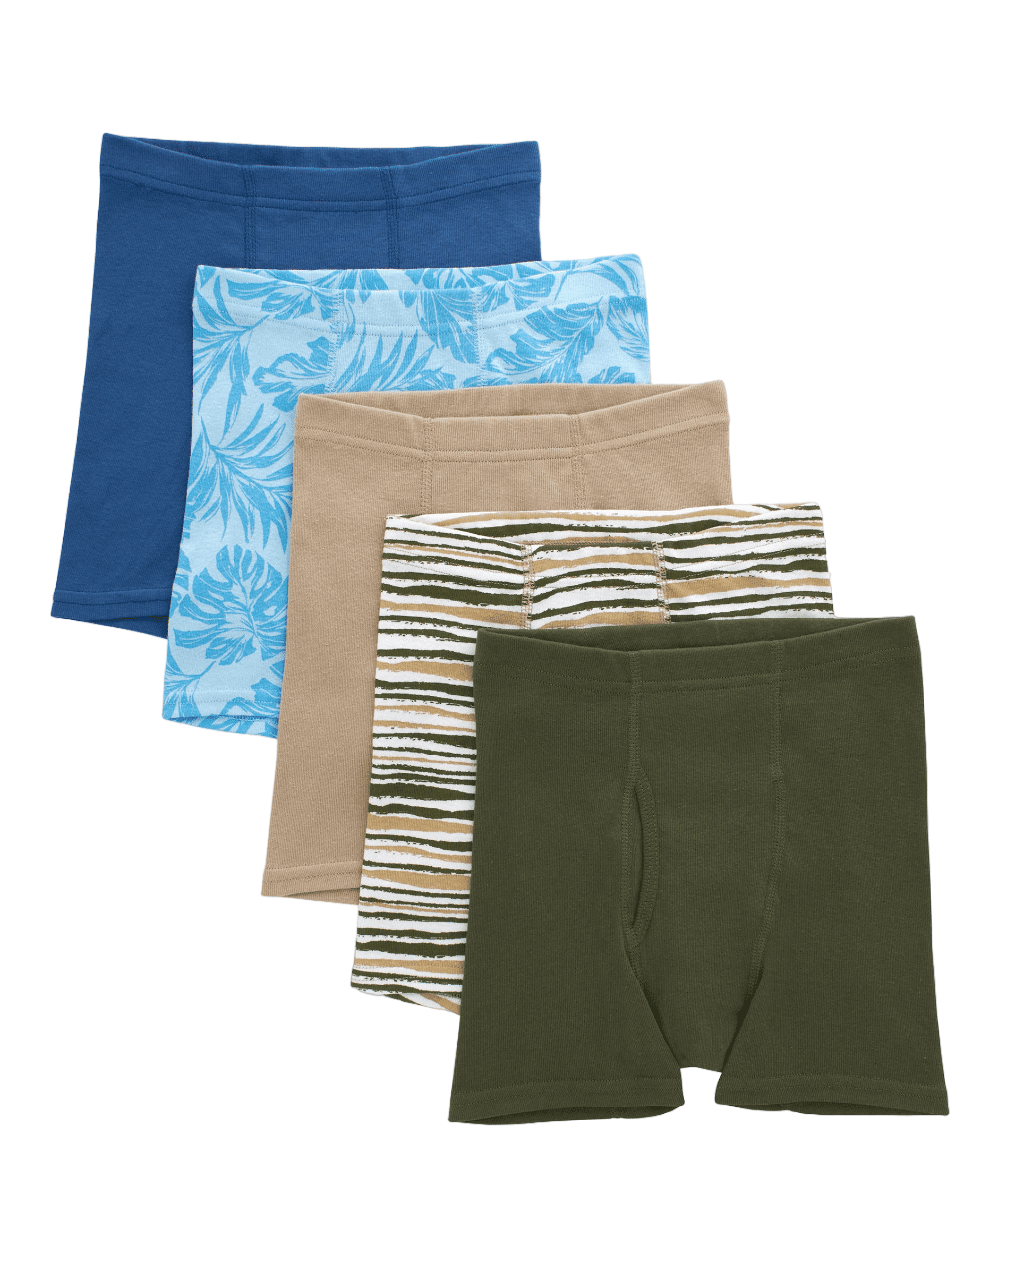 Hanes Boys Ultimate Dyed Briefs With ComfortSoft Waistband 5-Pack, XS,  Assorted 